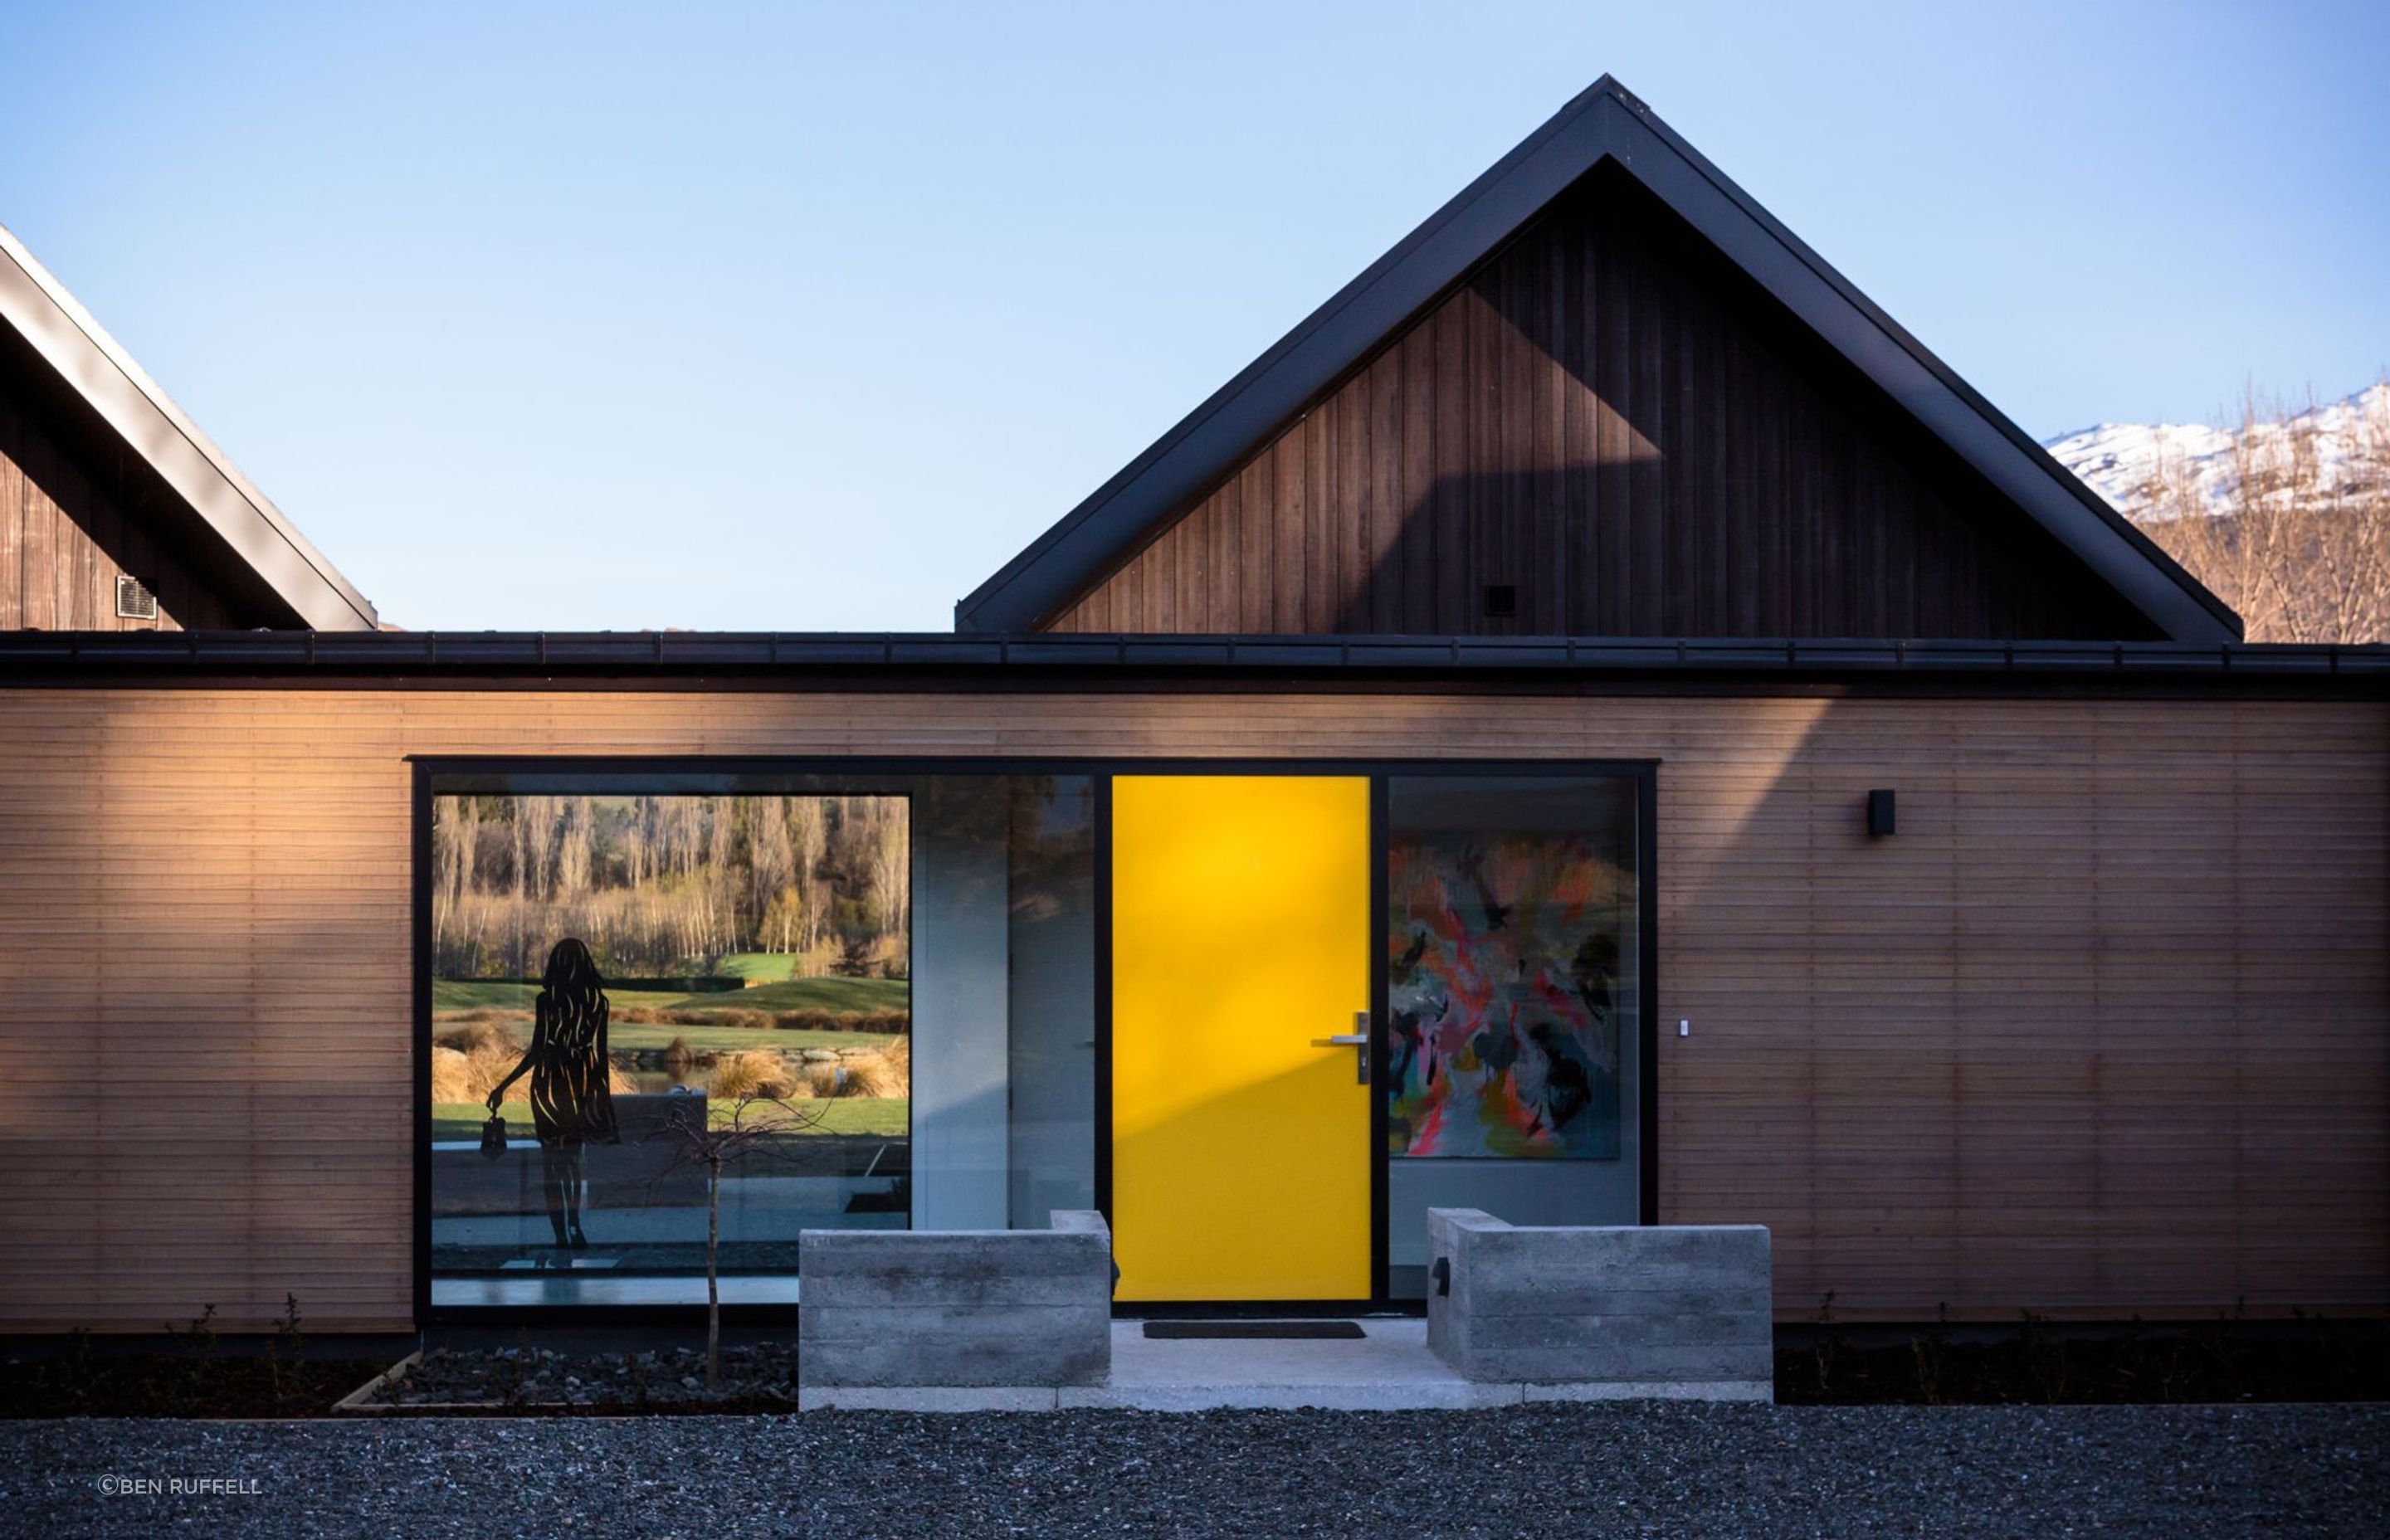 The bright yellow, aluminium front door sets up the sense of arrival and serves as a counterbalance to the mid-ground view spied through the adjacent window.